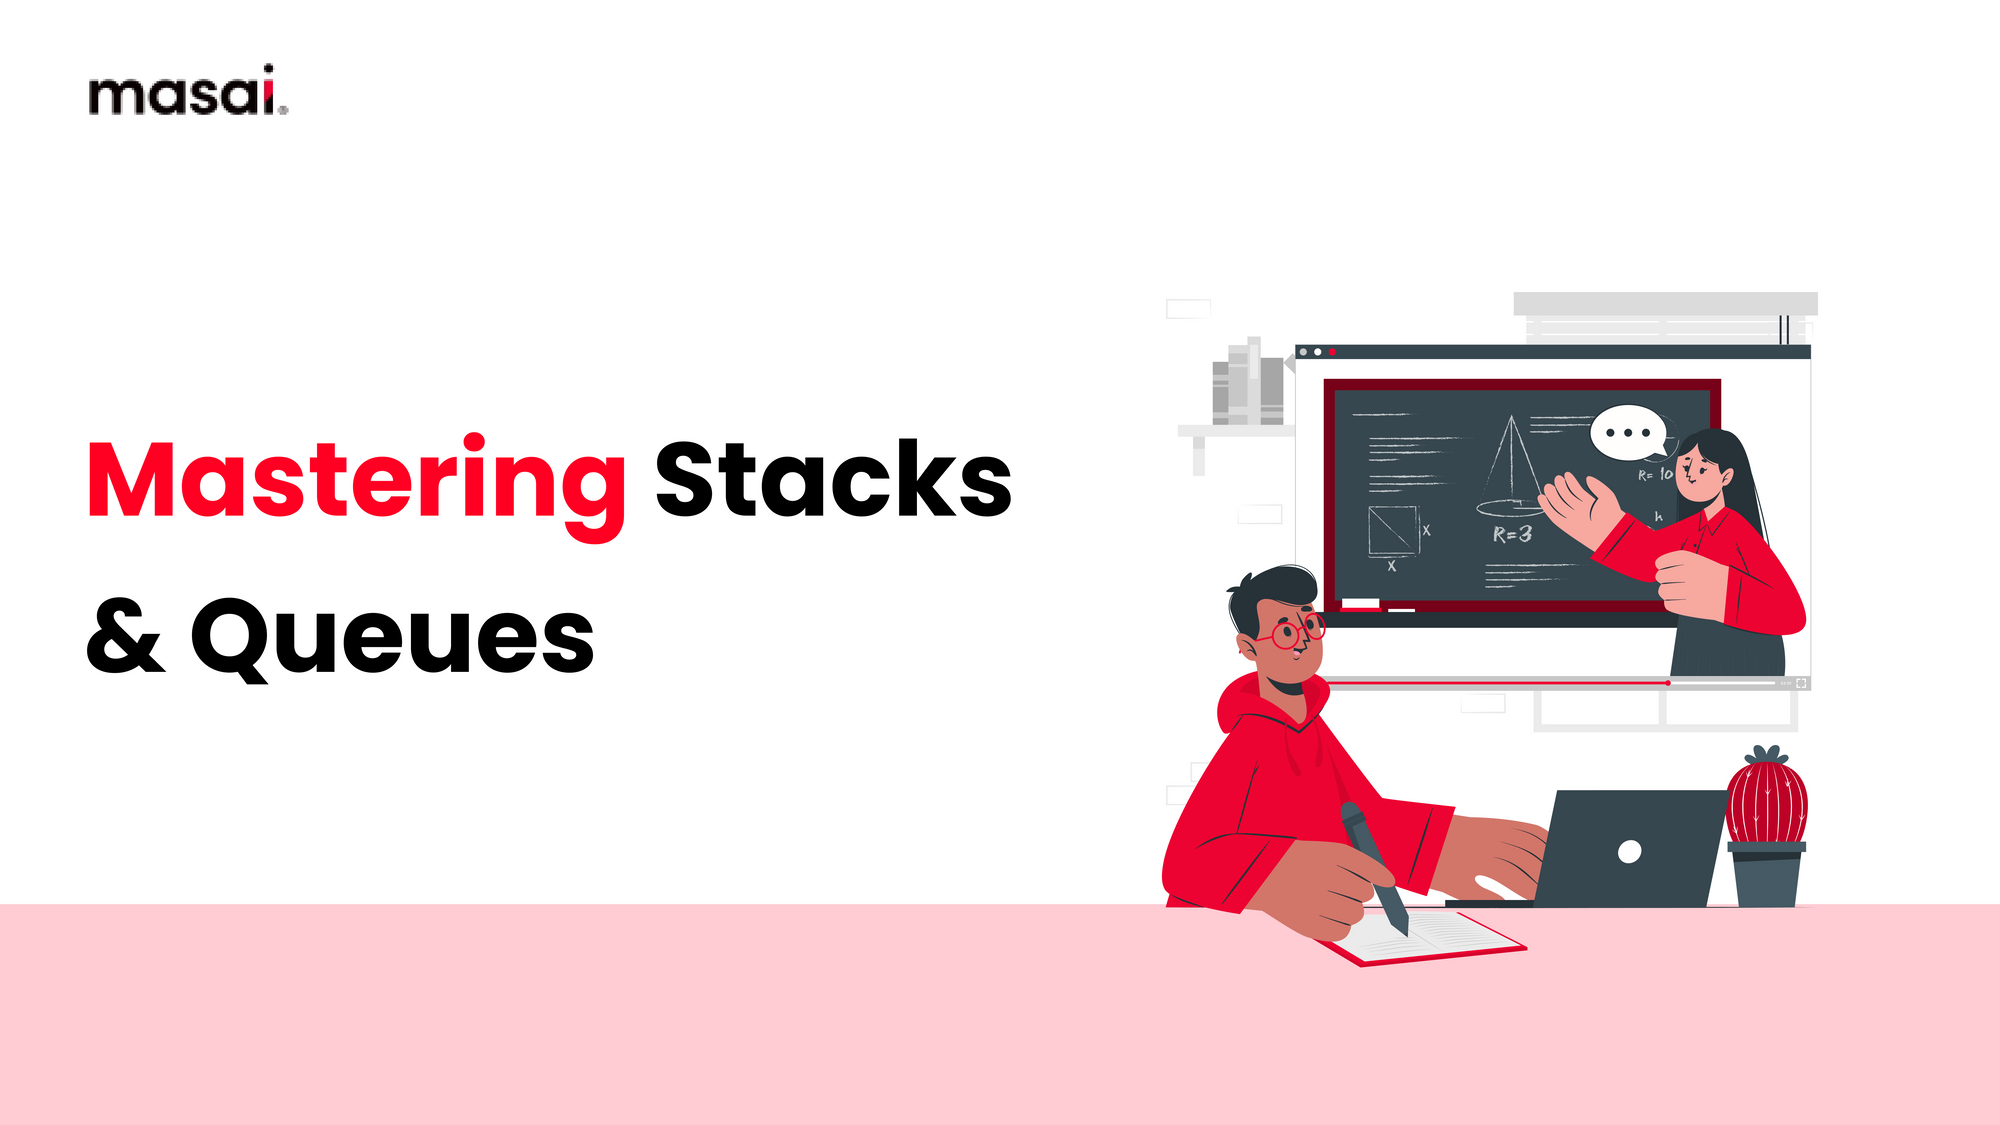 Mastering Stacks and Queues